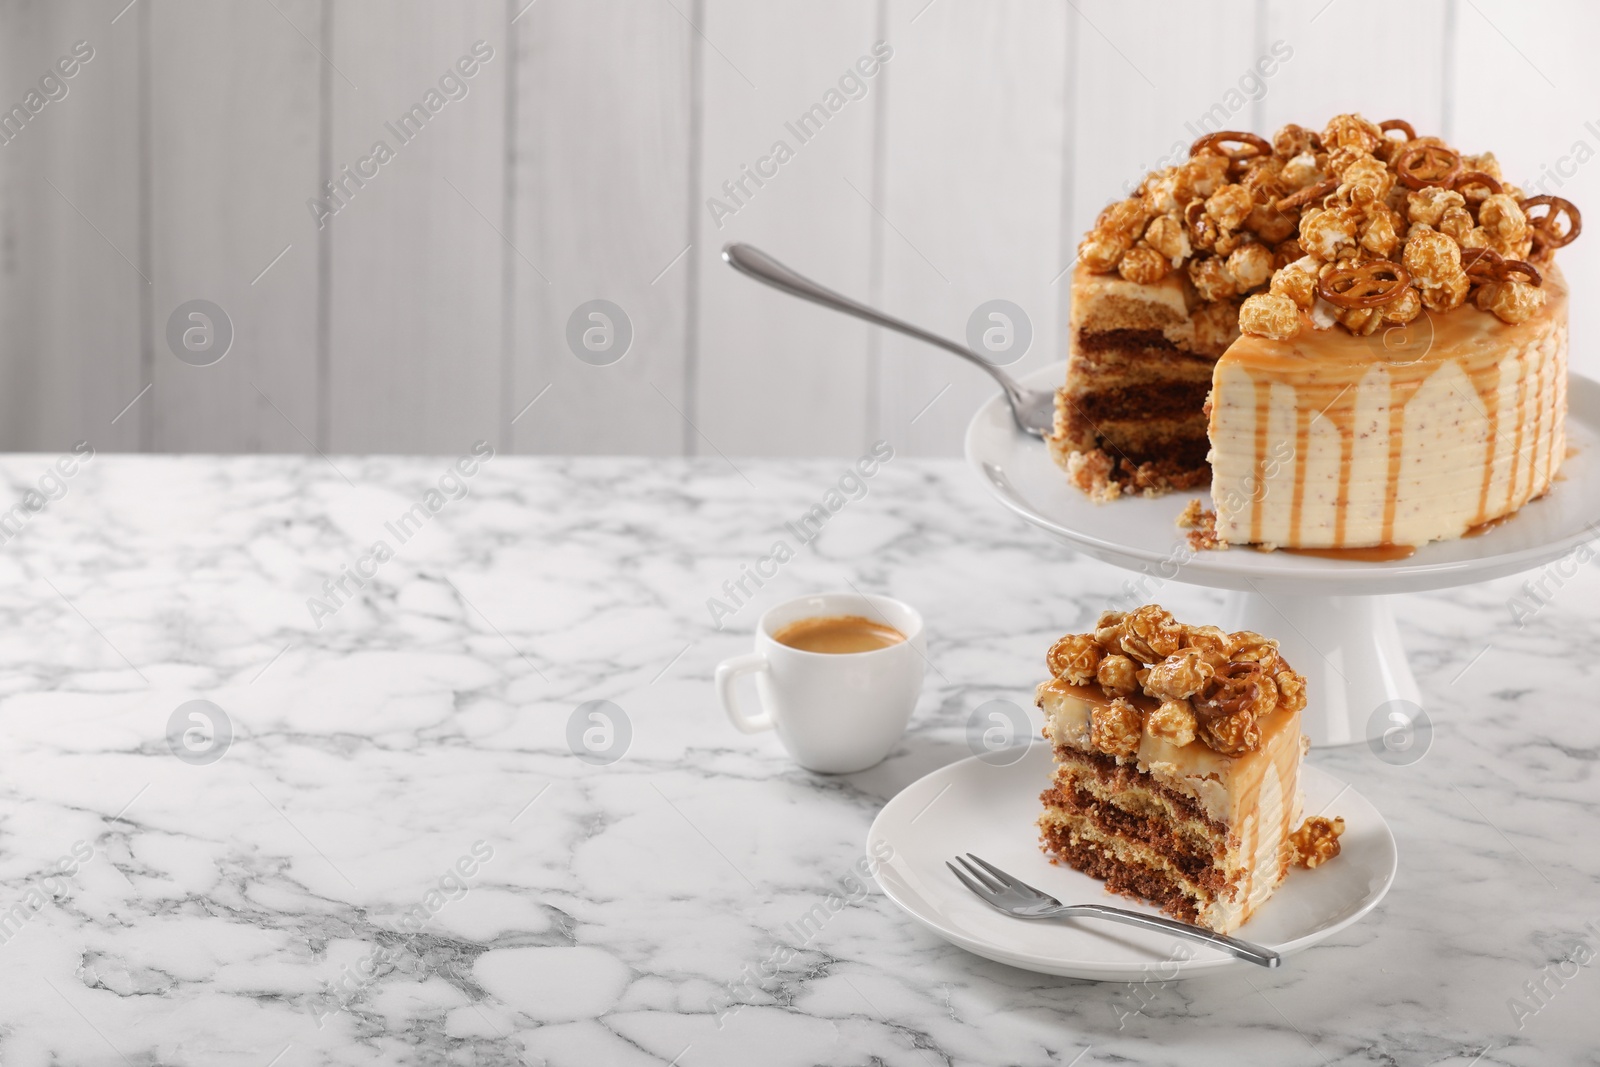 Photo of Caramel drip cake decorated with popcorn and pretzels served on white marble table, space for text